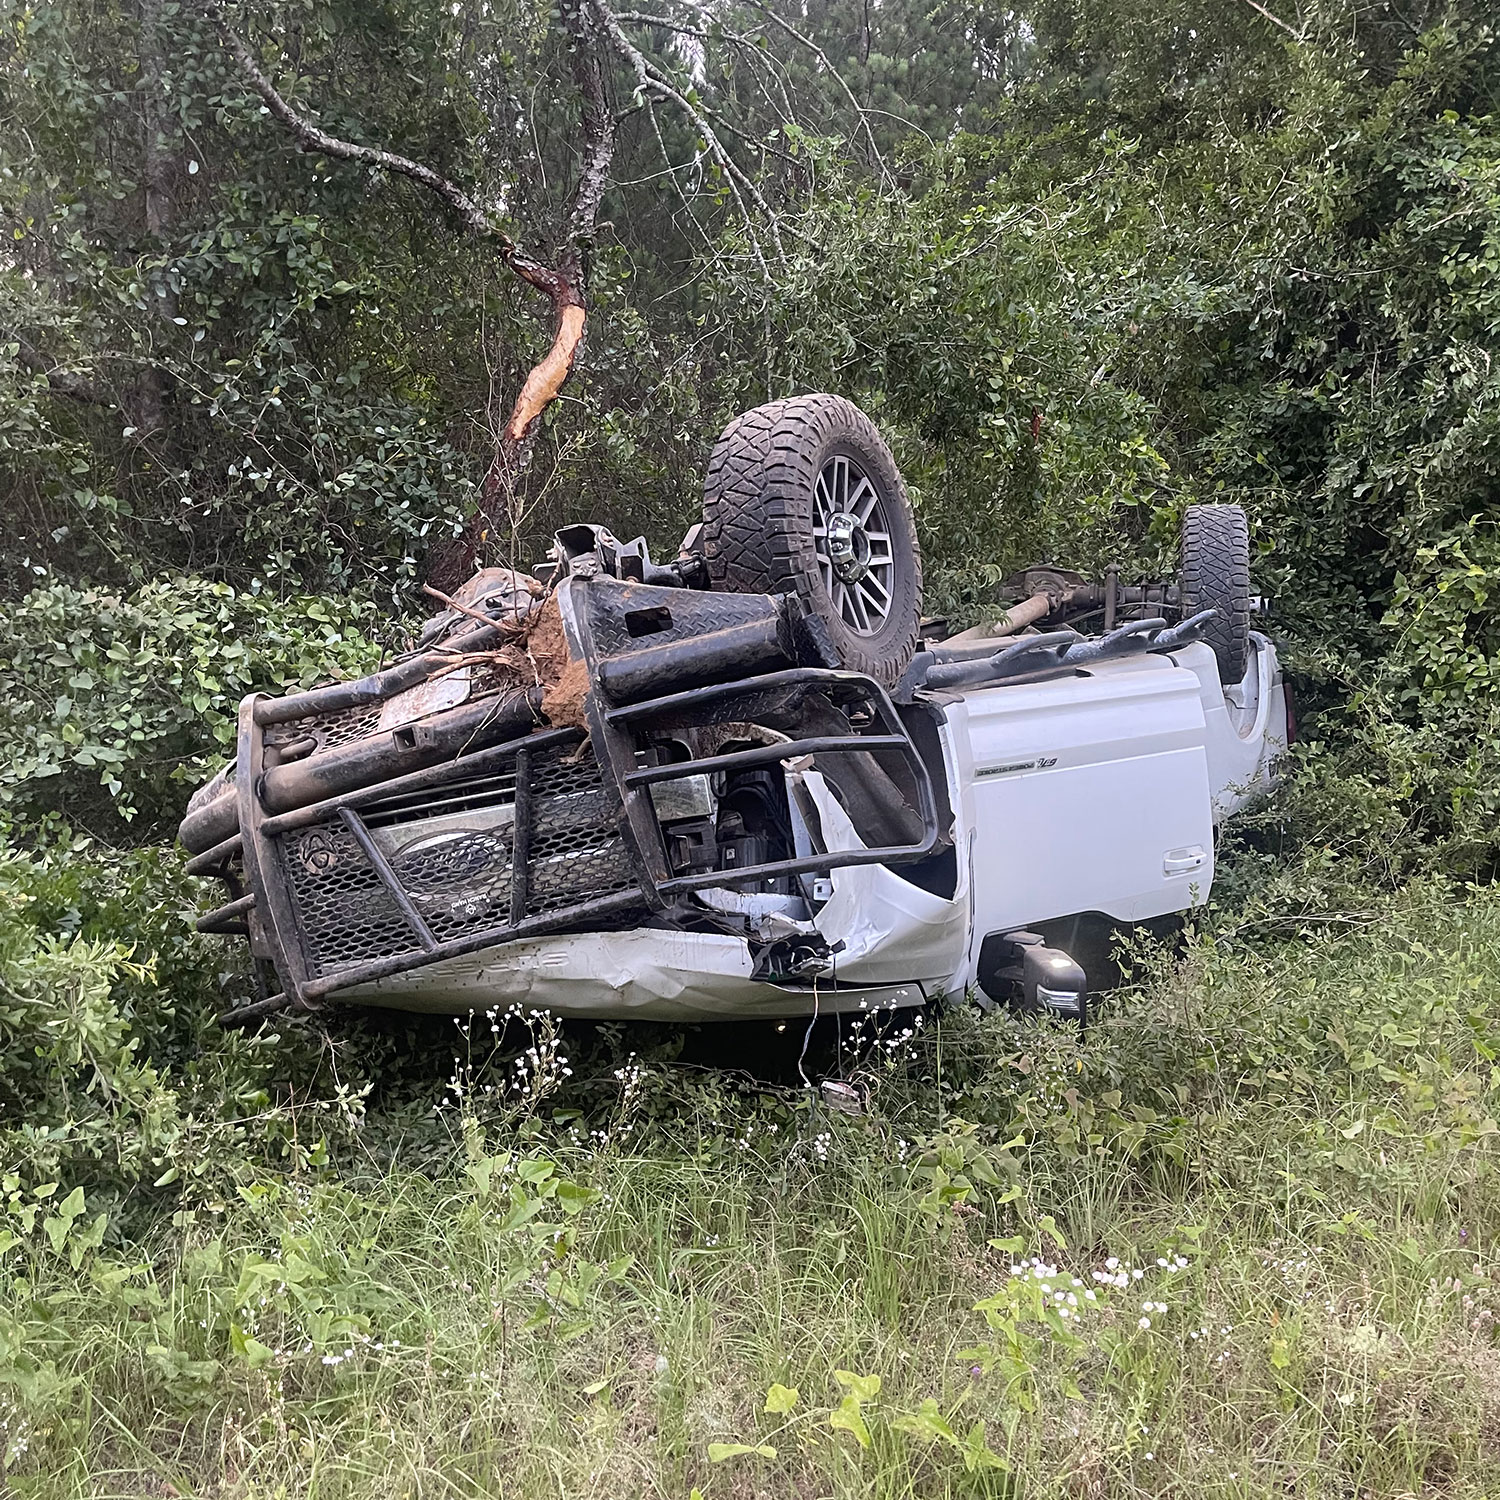 My Ranch Hand Took The Full Force